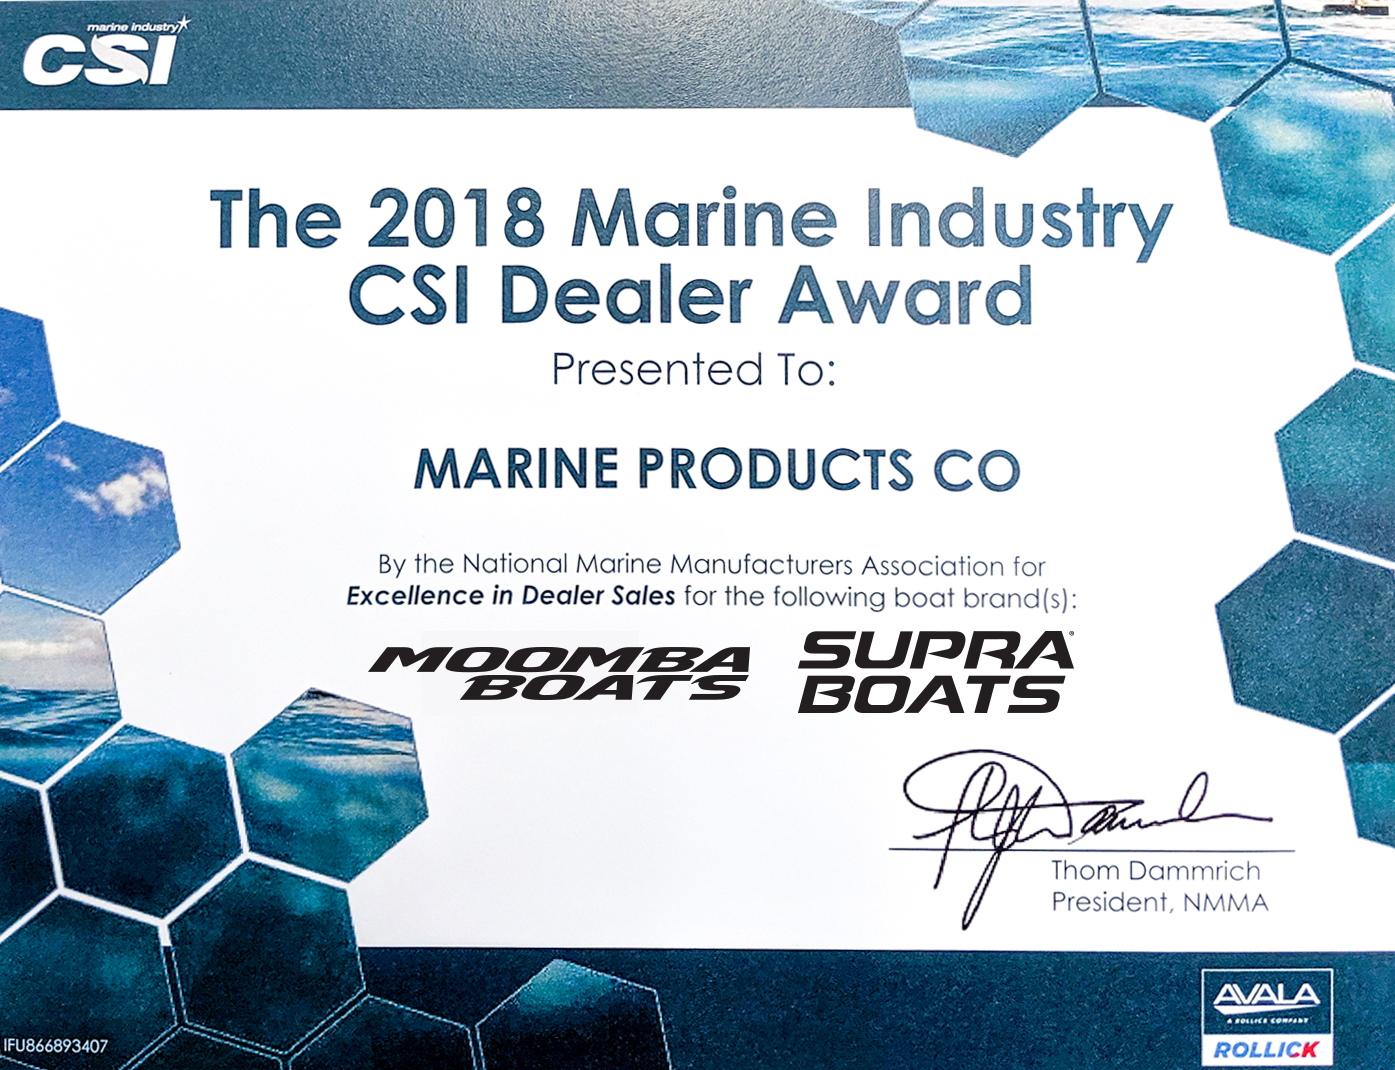 Marine Products Receives The 2018 CSI Dealer Award For Sales and Service